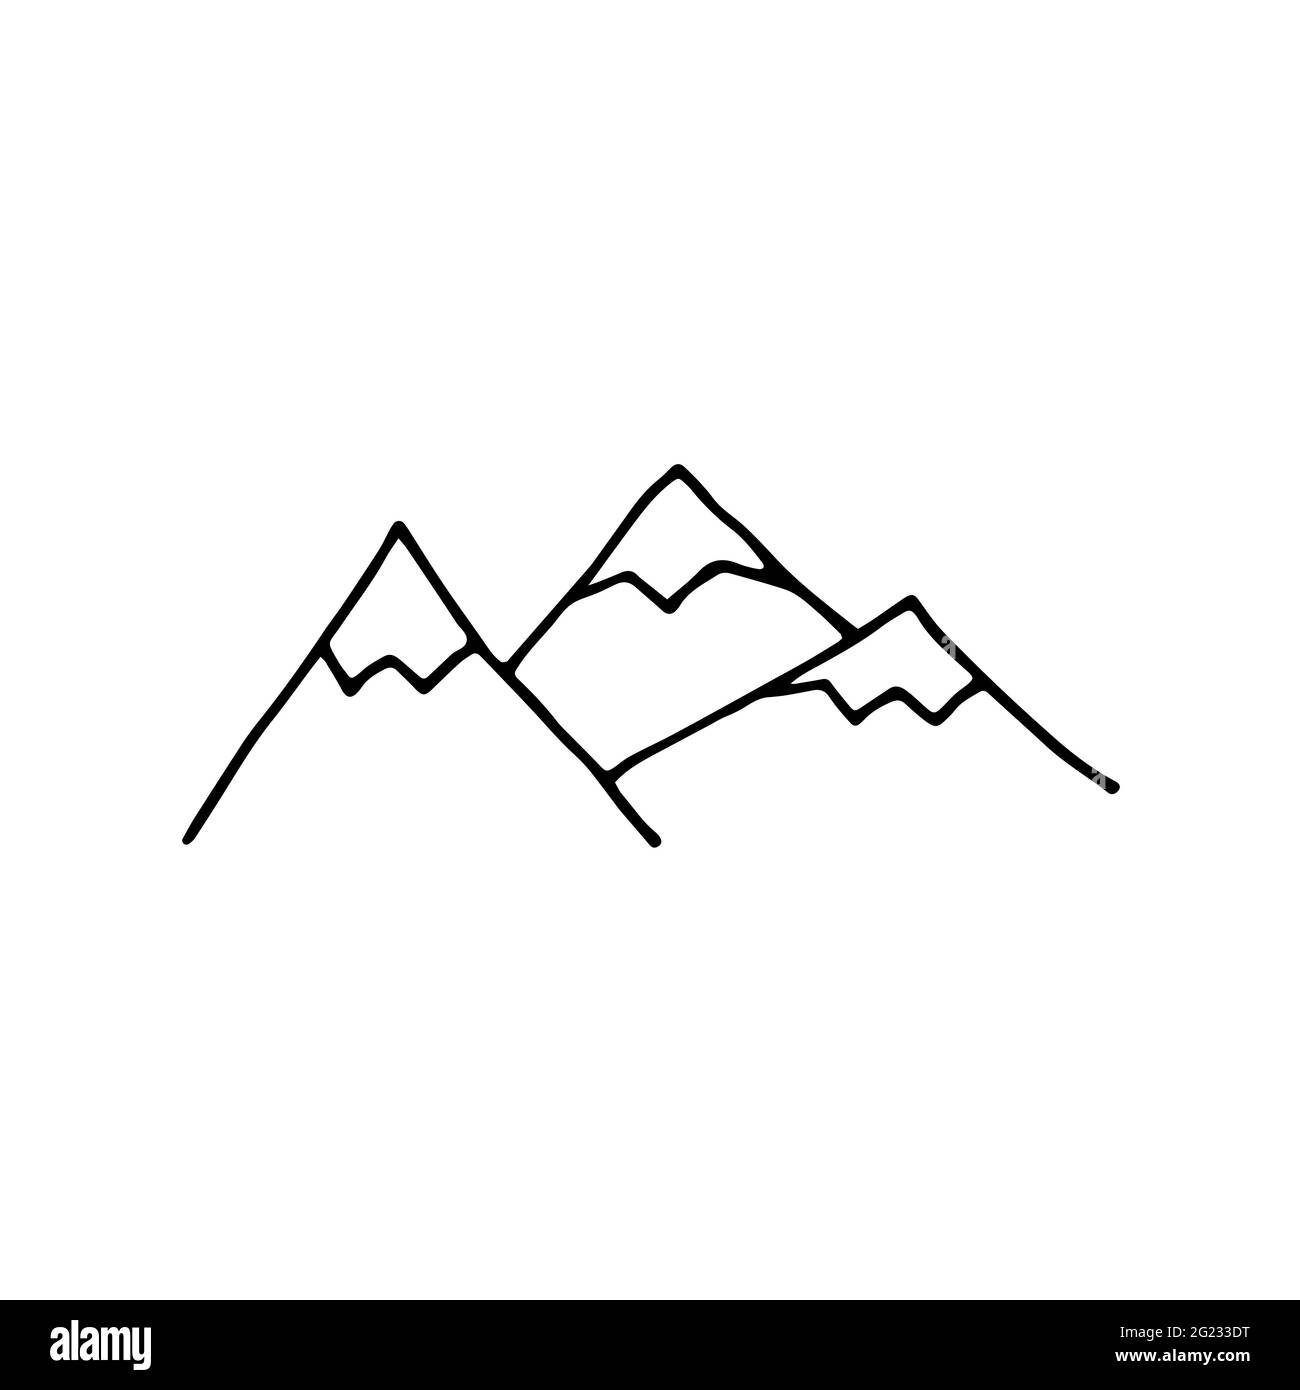 Doodle vector mountains. Outline Mountain isolated on a white background. Hand-drawn landscape detail. Cute stylized Scandinavian style snow capped mo Stock Vector